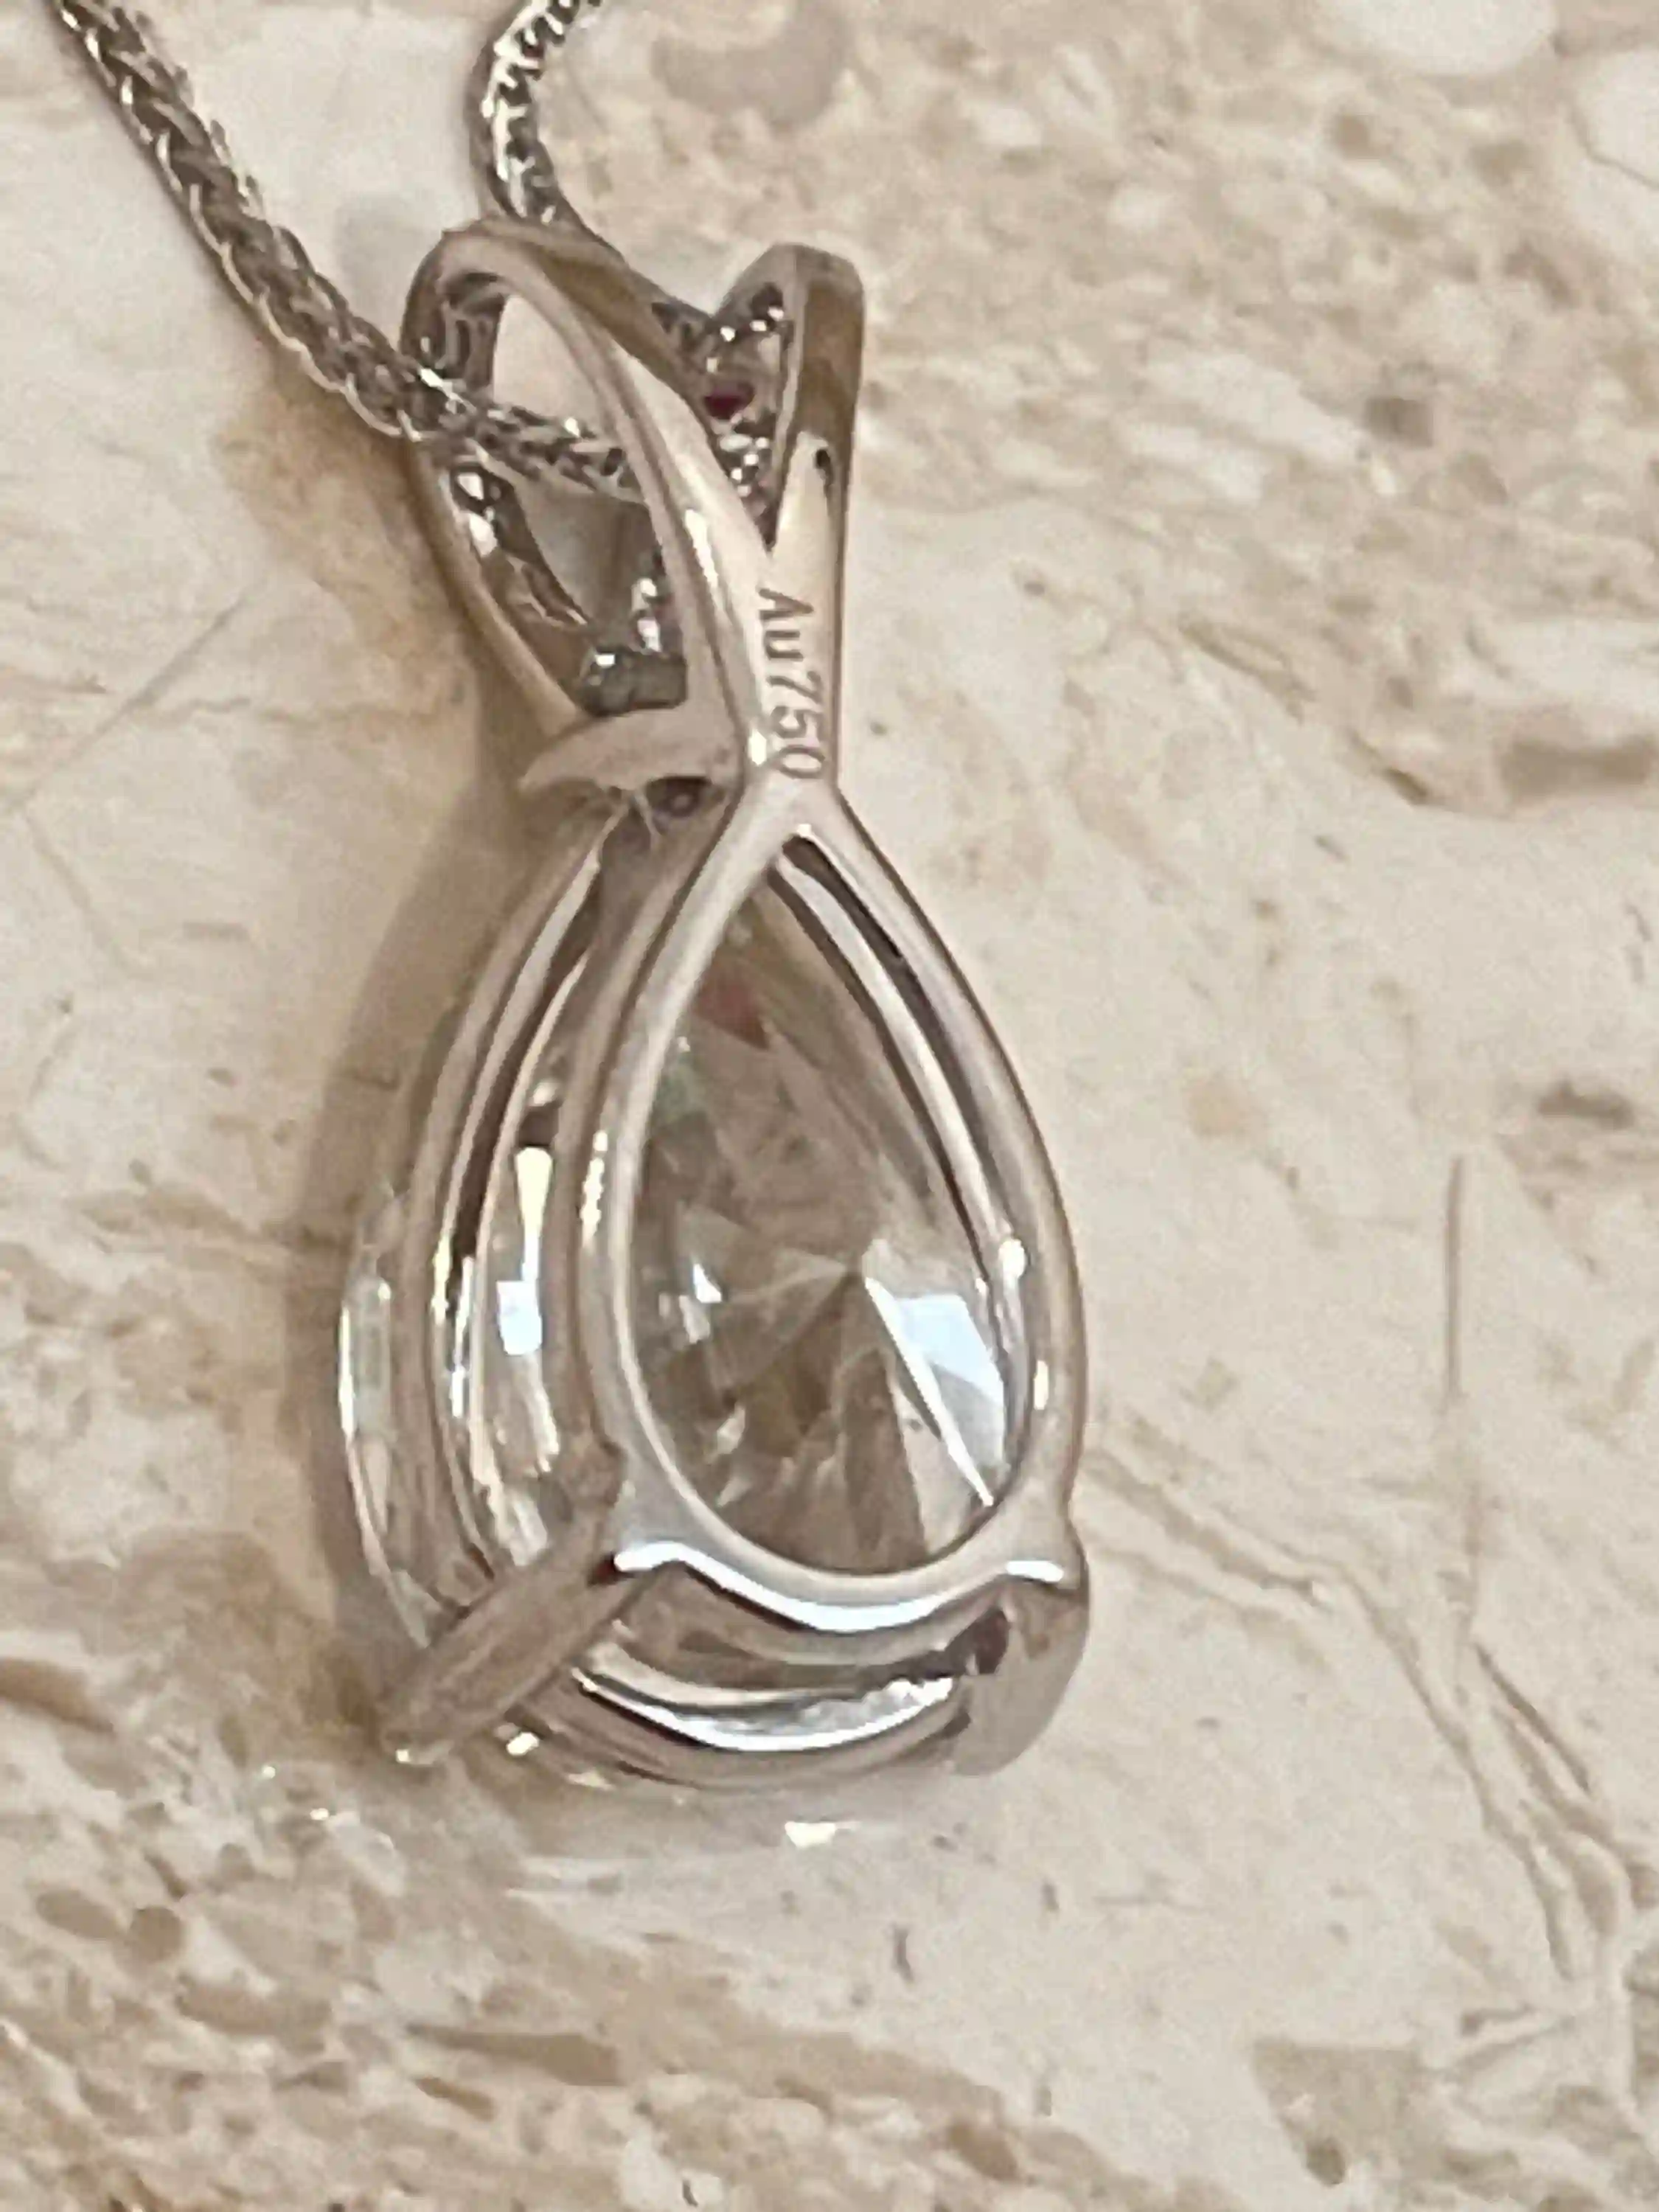 LabGrown Pear Shaped Diamond Necklace Pendant SOLID 18k White Gold GRA Certified 2 carat Solitaire Diamond Pear Pendant Fine Diamond Jewelry 